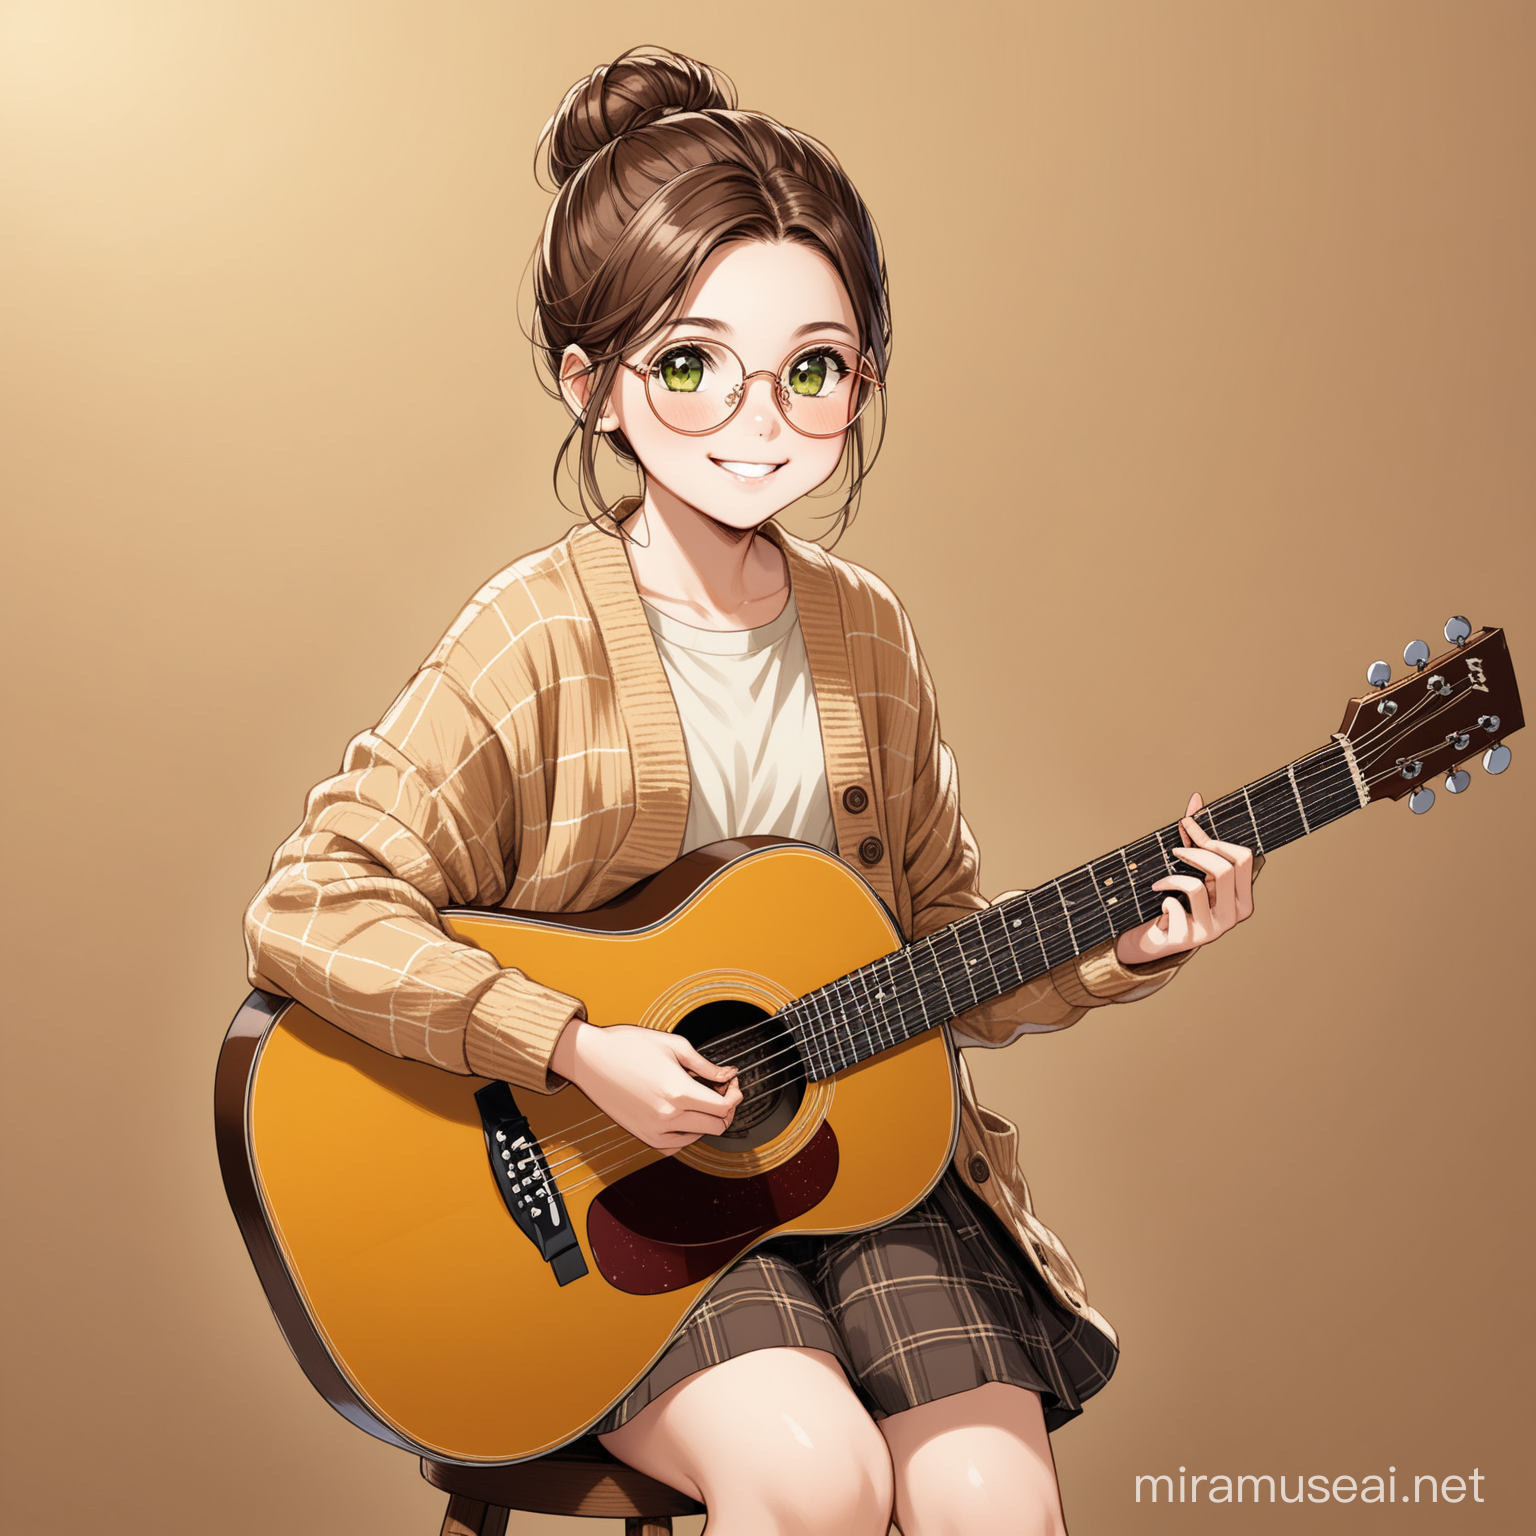 11 year old girl sitting down on a wooden stool, brown hair up in a messy bun with a few strands fallen out, dark green eyes, round rose gold glasses, checked yellow and brown long cardigan, beige t shirt under the cardigan, black knee length skirt, brown laced up boots, strumming a wooden brown guitar, smiling,  